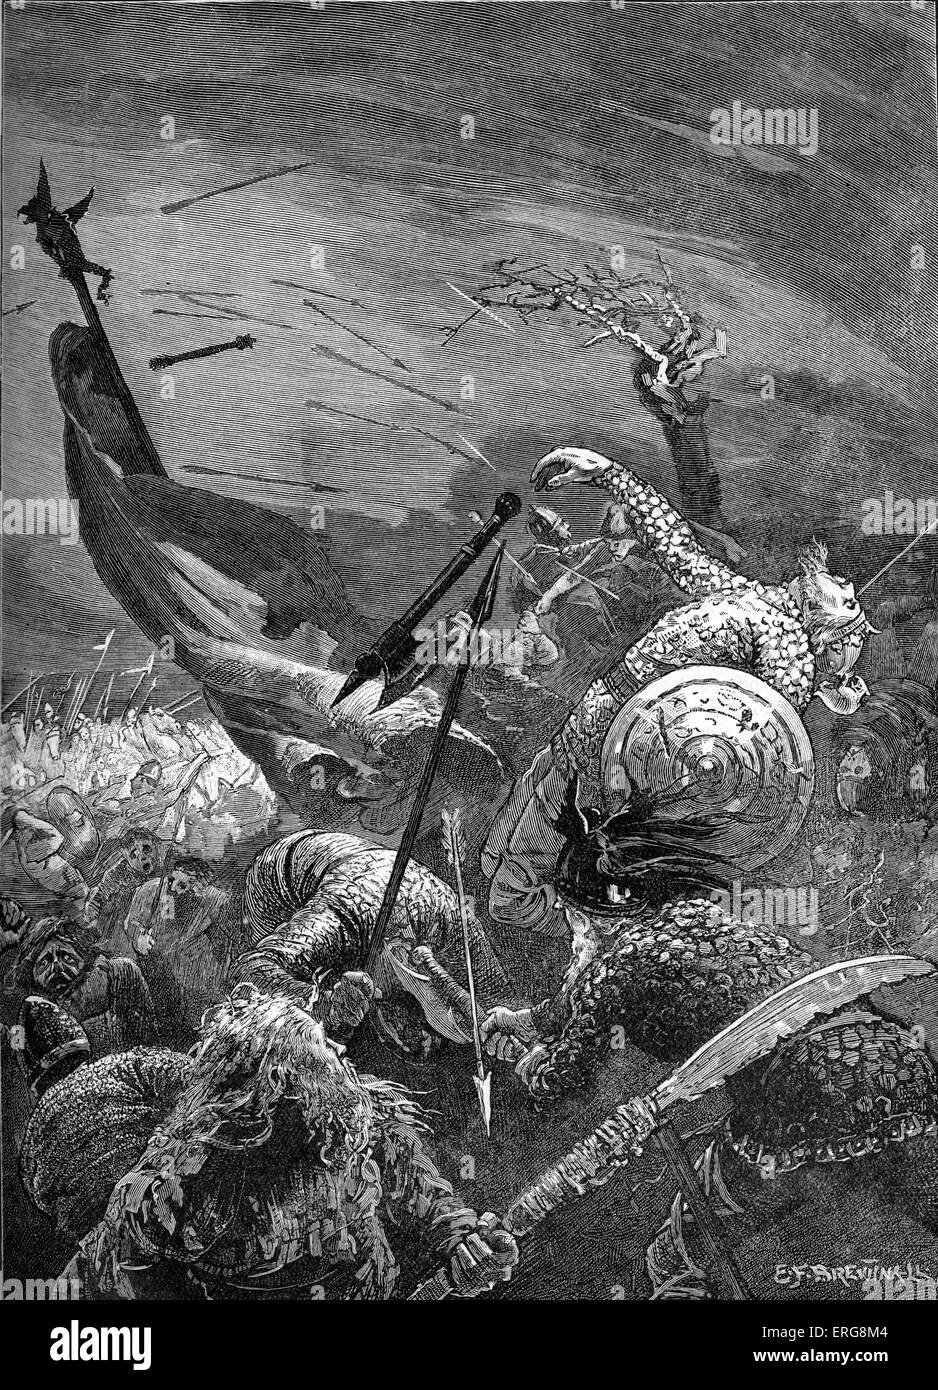 Battle of Hastings - death of Harold II (Harold Godwinson), 14 October 1066. Battle of Norman Conquest of England under William Stock Photo